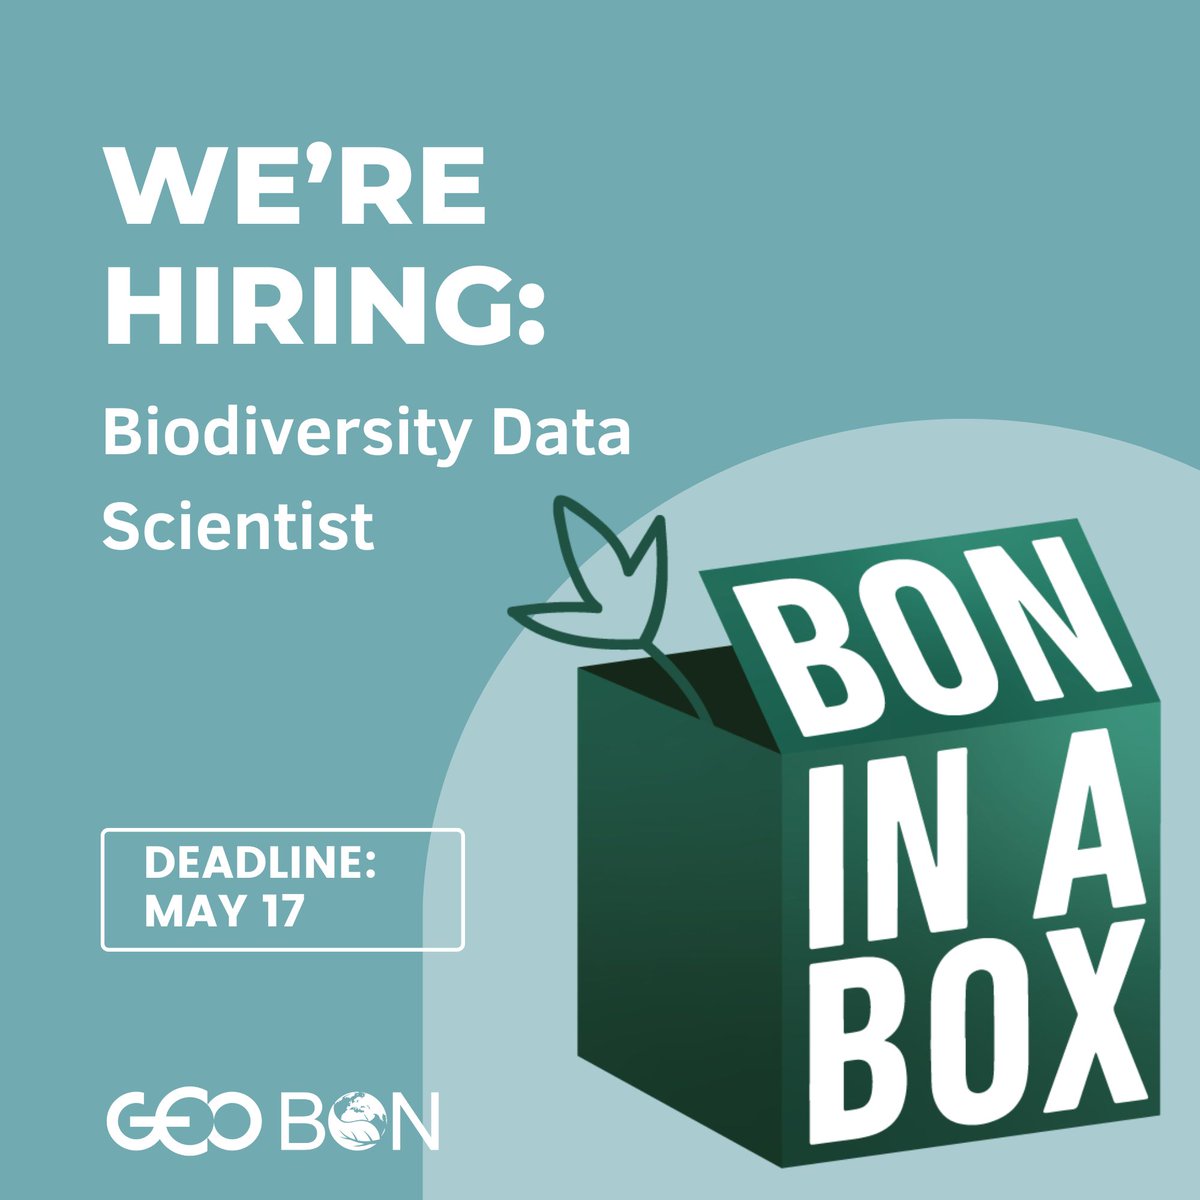 🚨#HiringAlert for Biodiversity Data Scientist!

Collaborate with experts to develop EBVs and indicators workflows, assess results, present findings and be part of the #BONInABox project! 

🇨🇦Based in Montreal

Apply now 👉 mcgill.wd3.myworkdayjobs.com/en-US/mcgill_c…

Deadline: May 17th

#Retweet